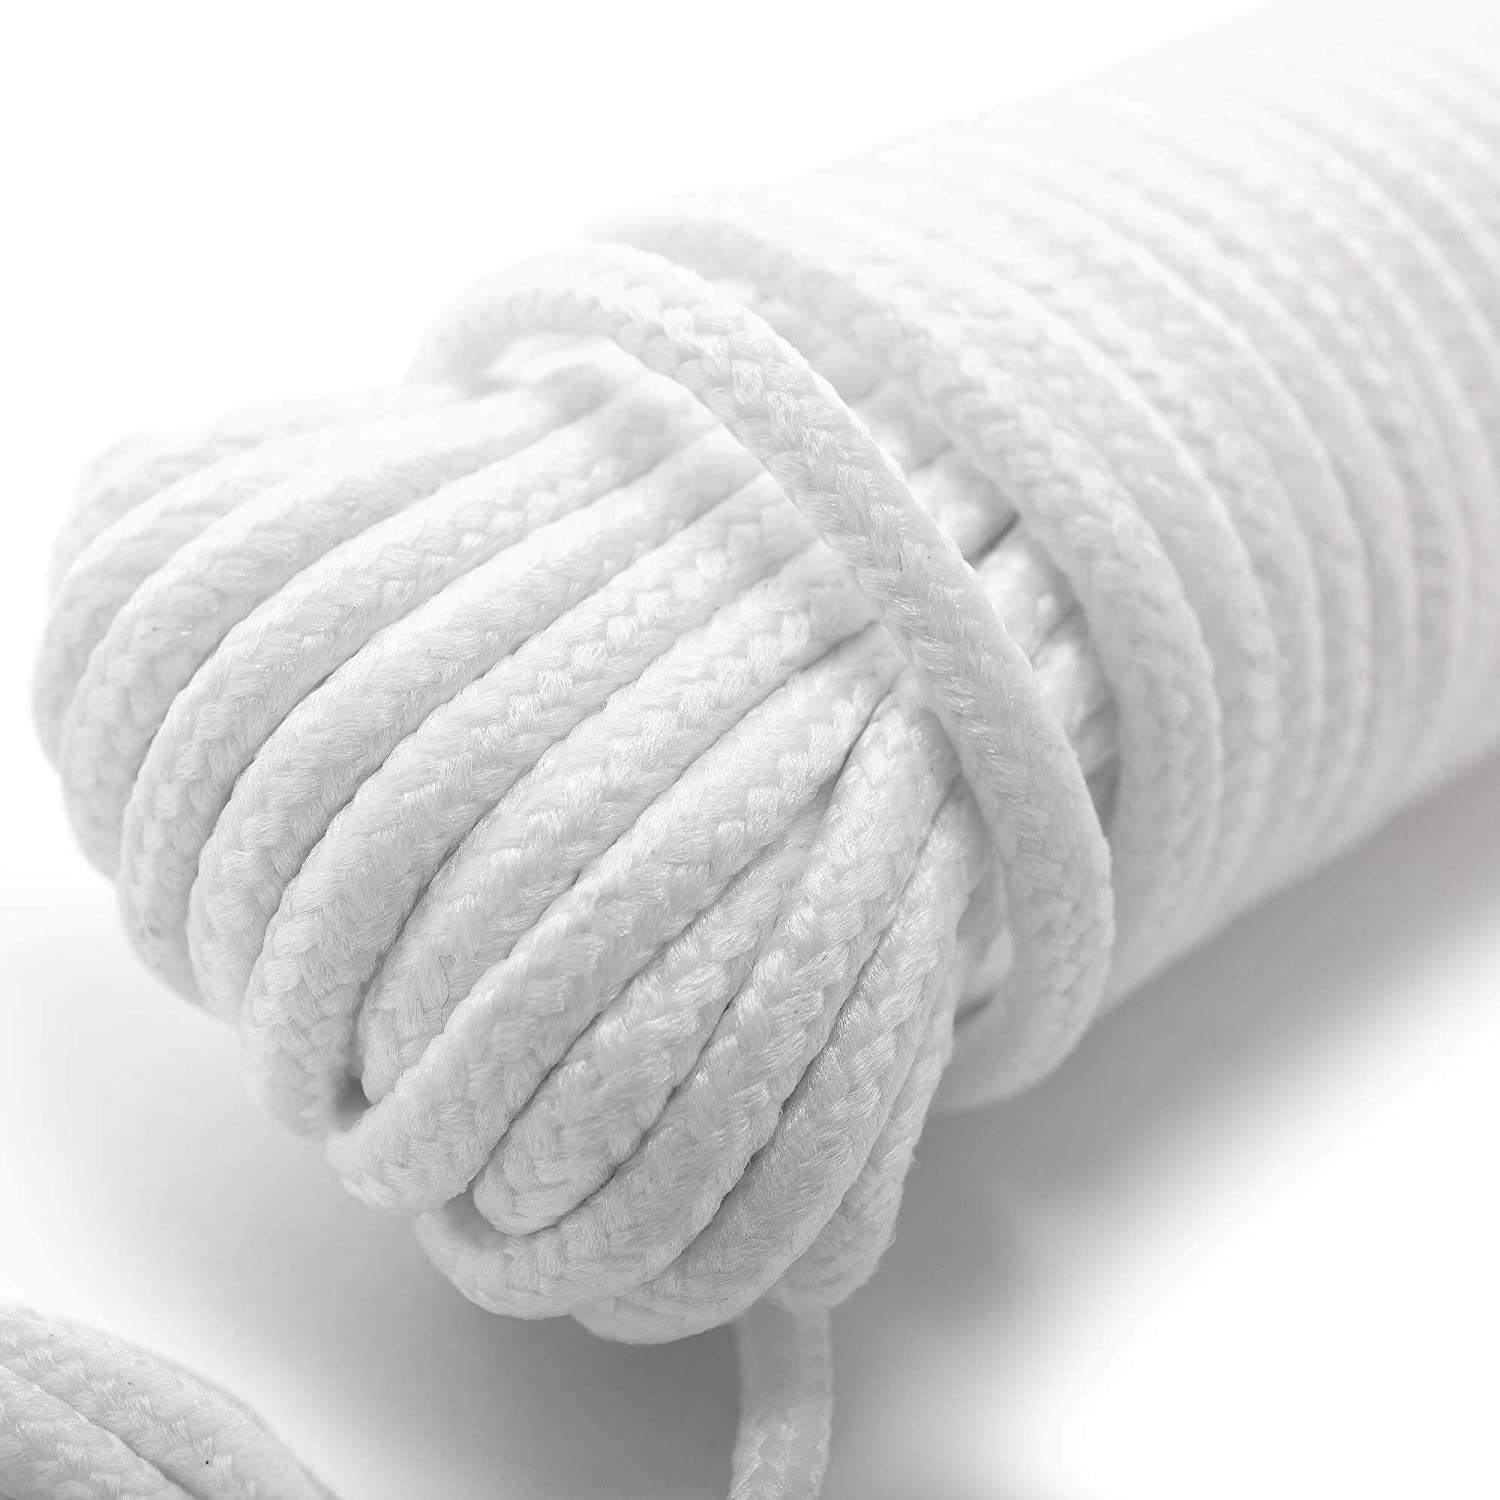 All-Purpose Weather Resistant Clothesline Cord - Cotton Cloth Braided Rope  - 1 Line x 50 Feet - White